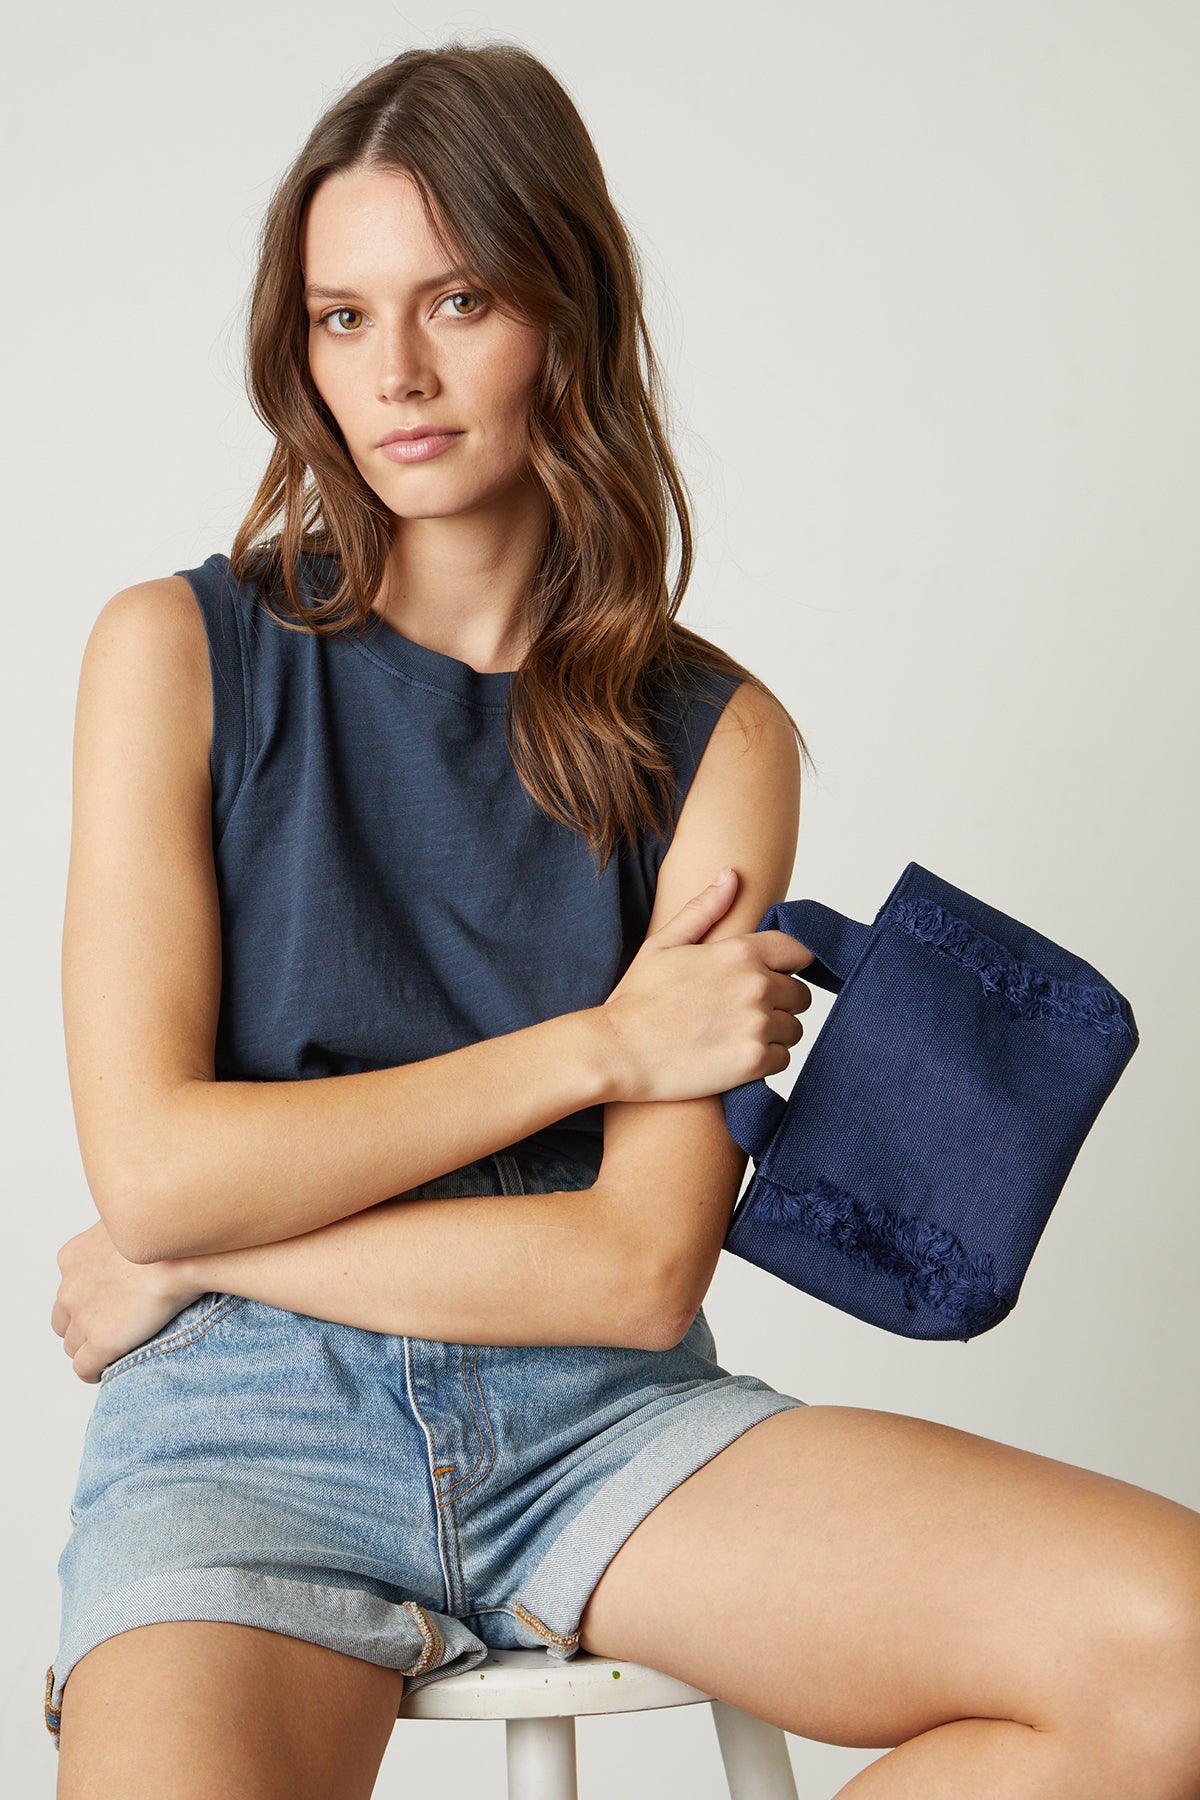 Mini Launch canvas tote in natural with model wearing navy tank and denim shorts-24659129270465